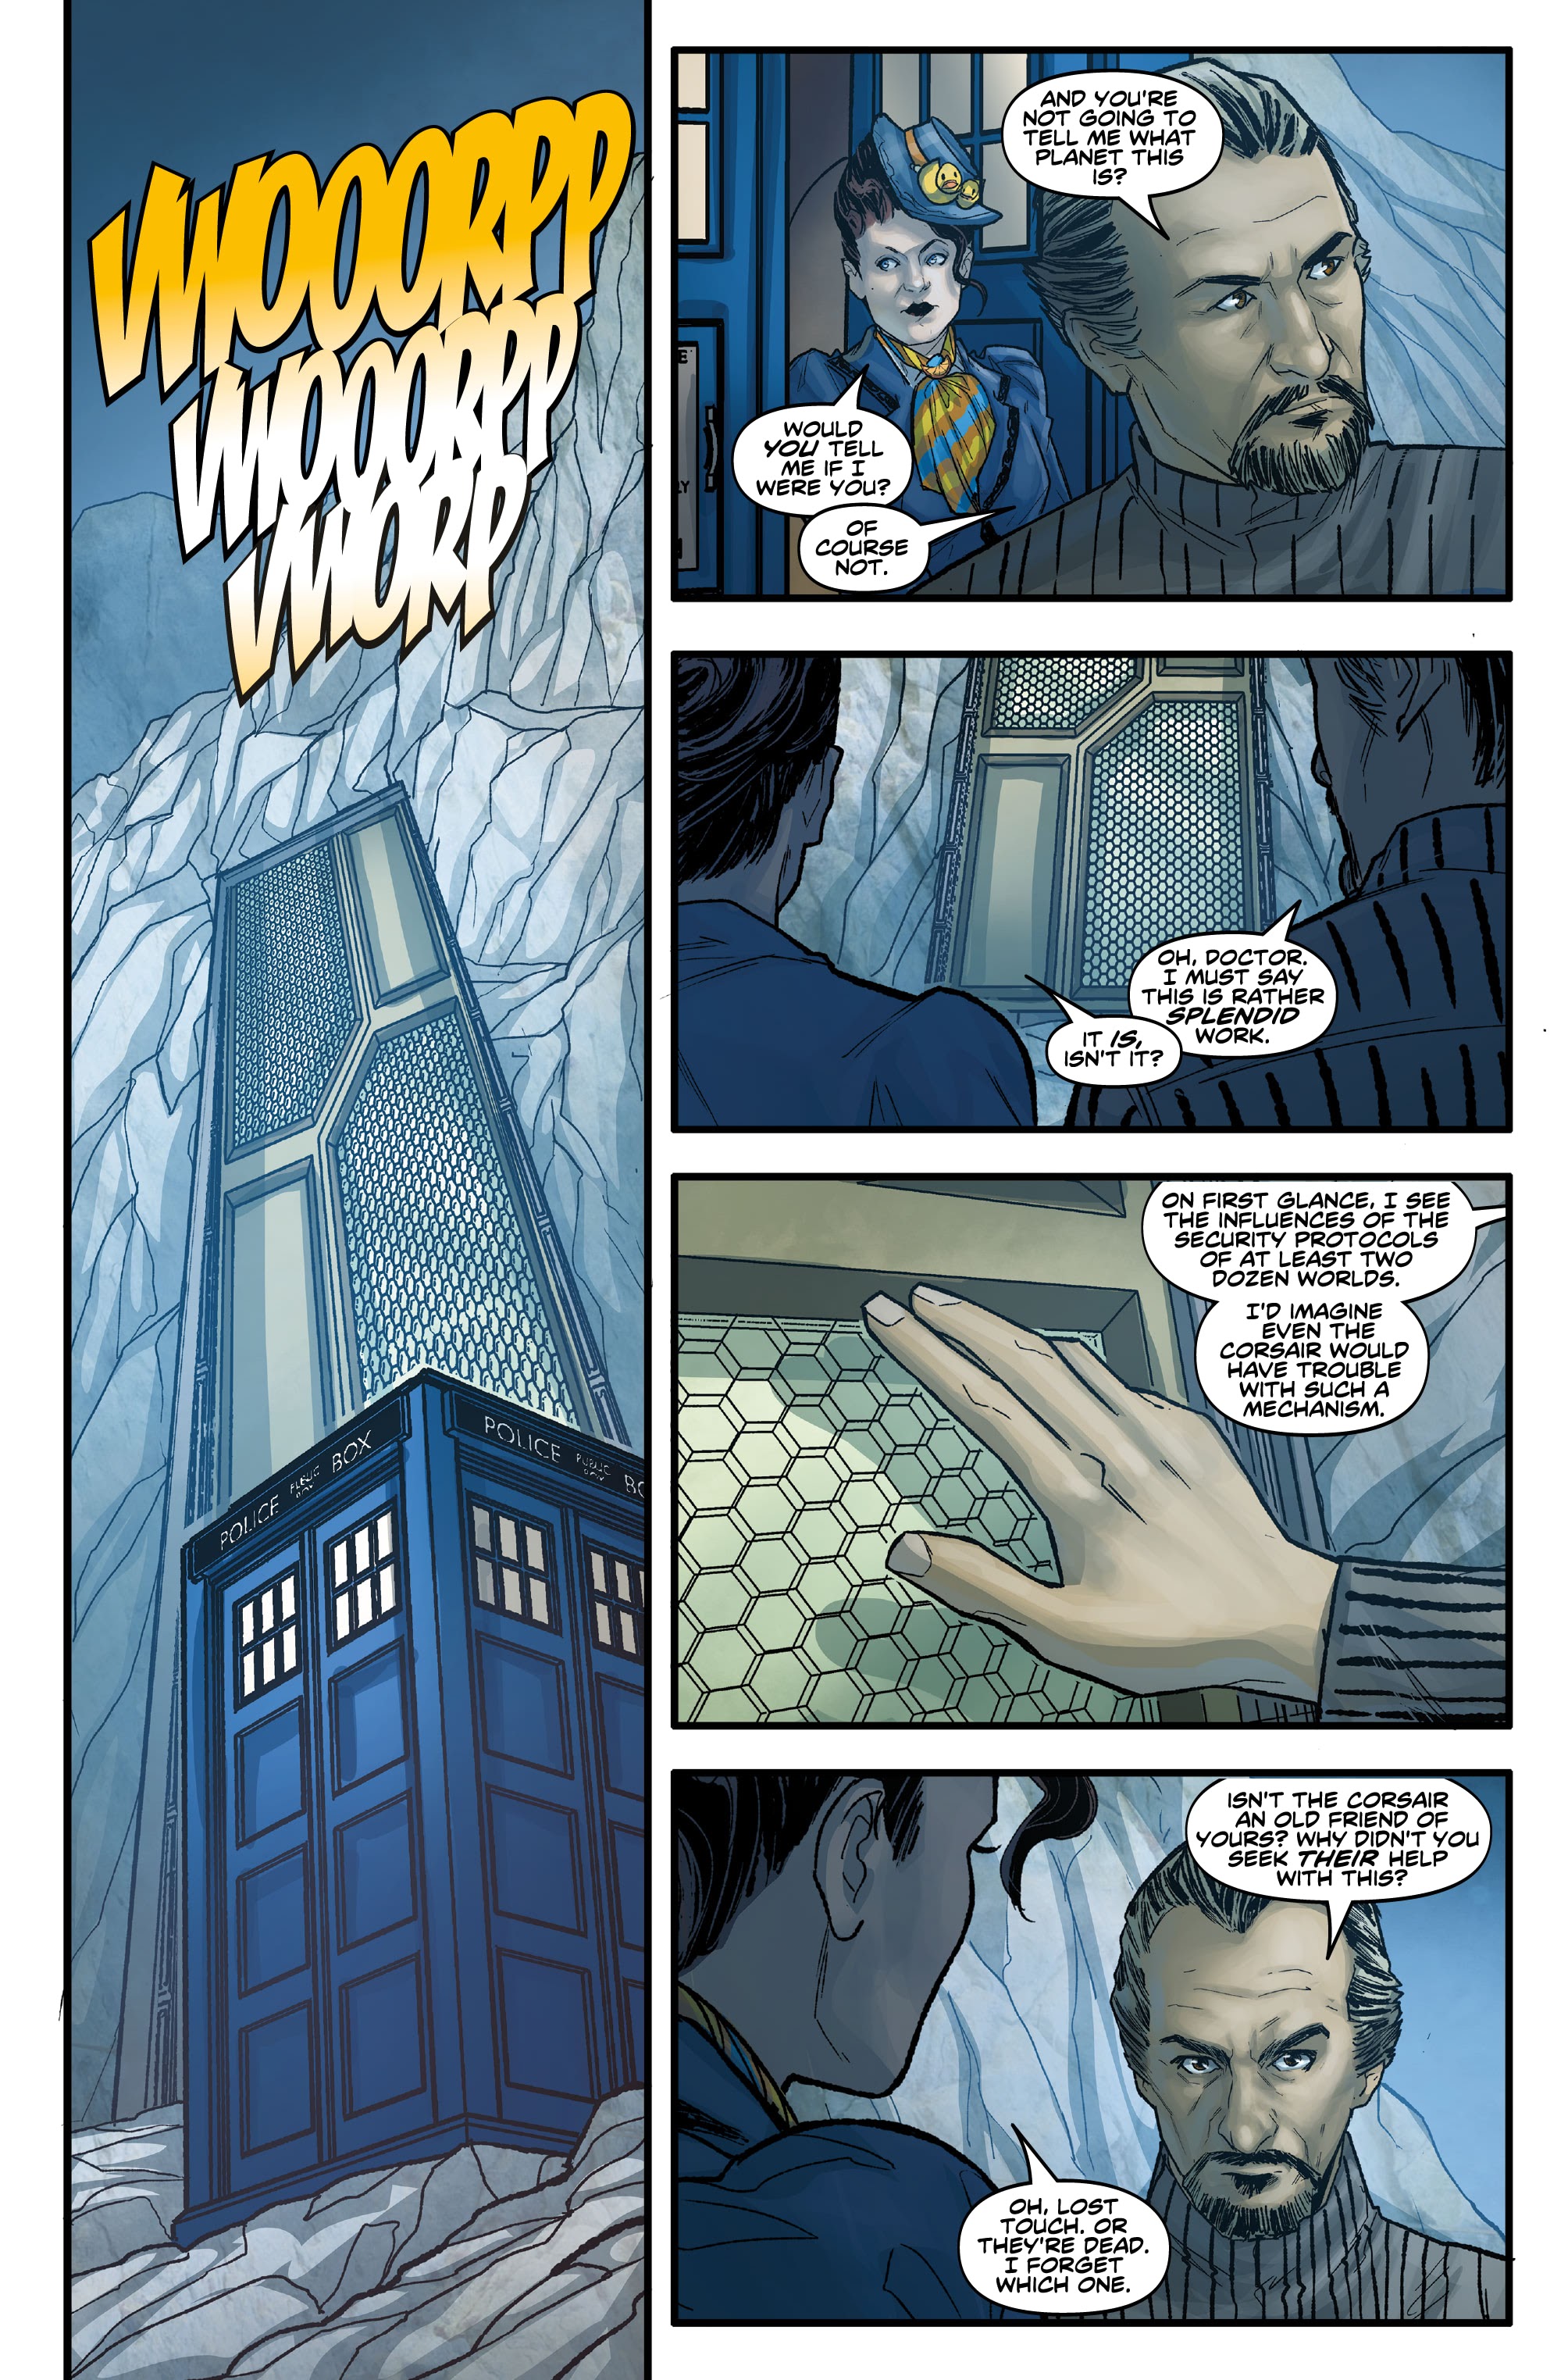 Read online Doctor Who: Missy comic -  Issue #2 - 25